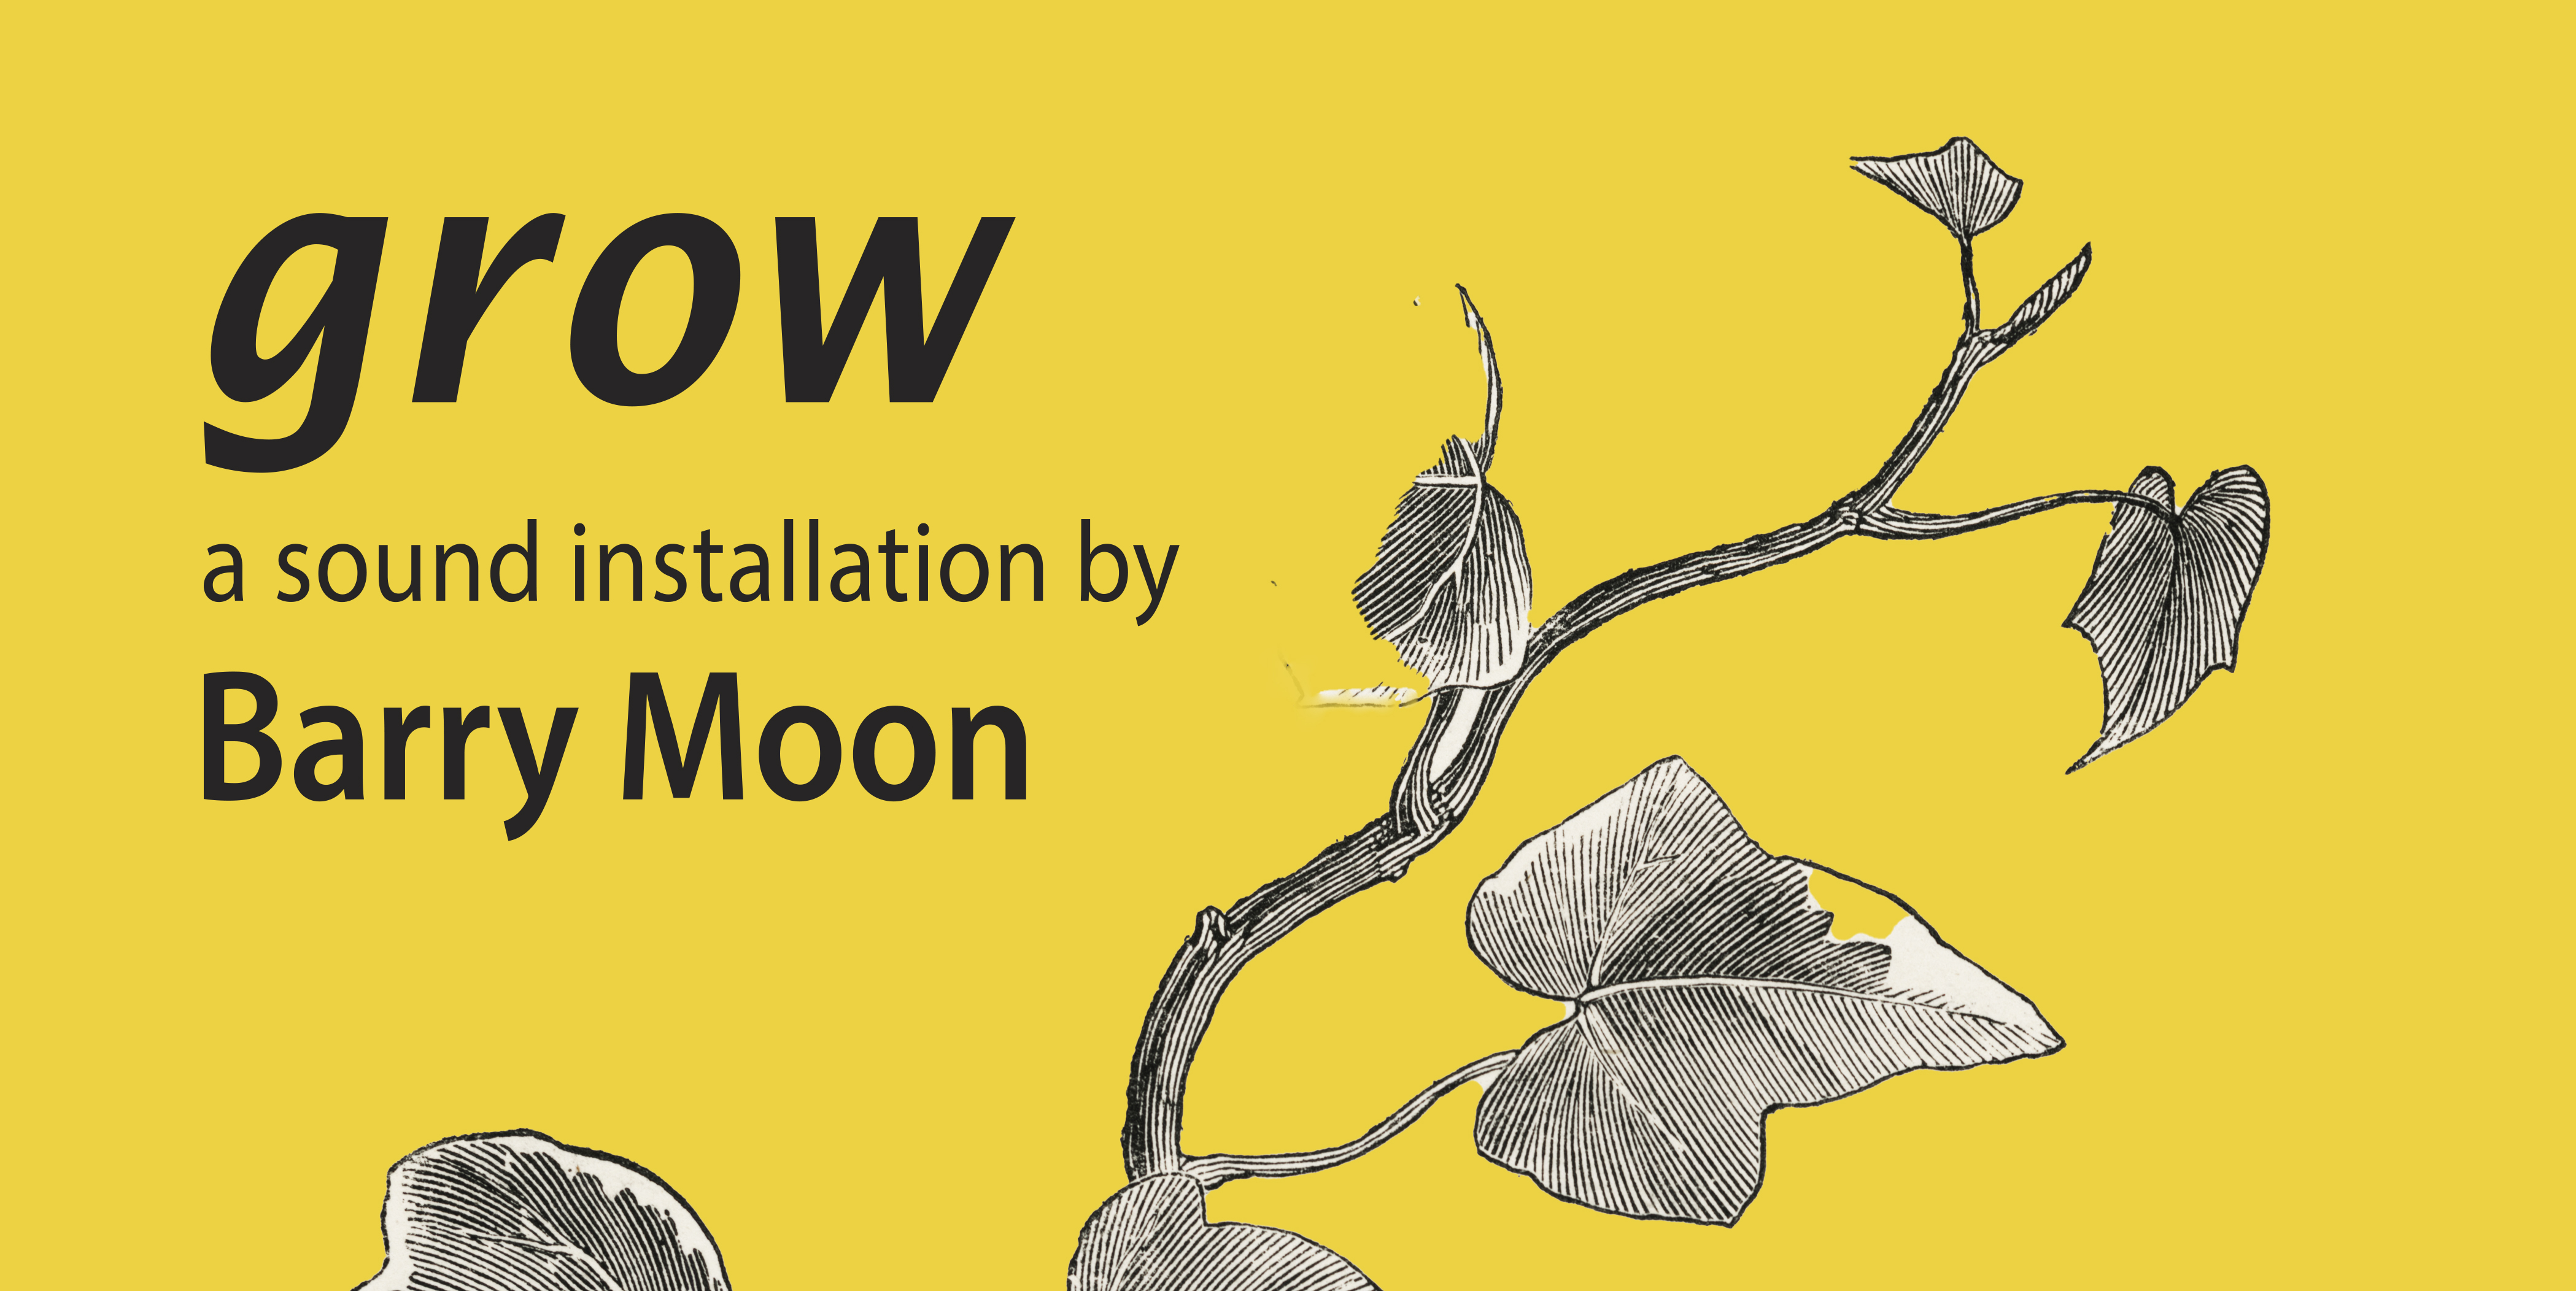 grow: a sound installation by Barry Moon